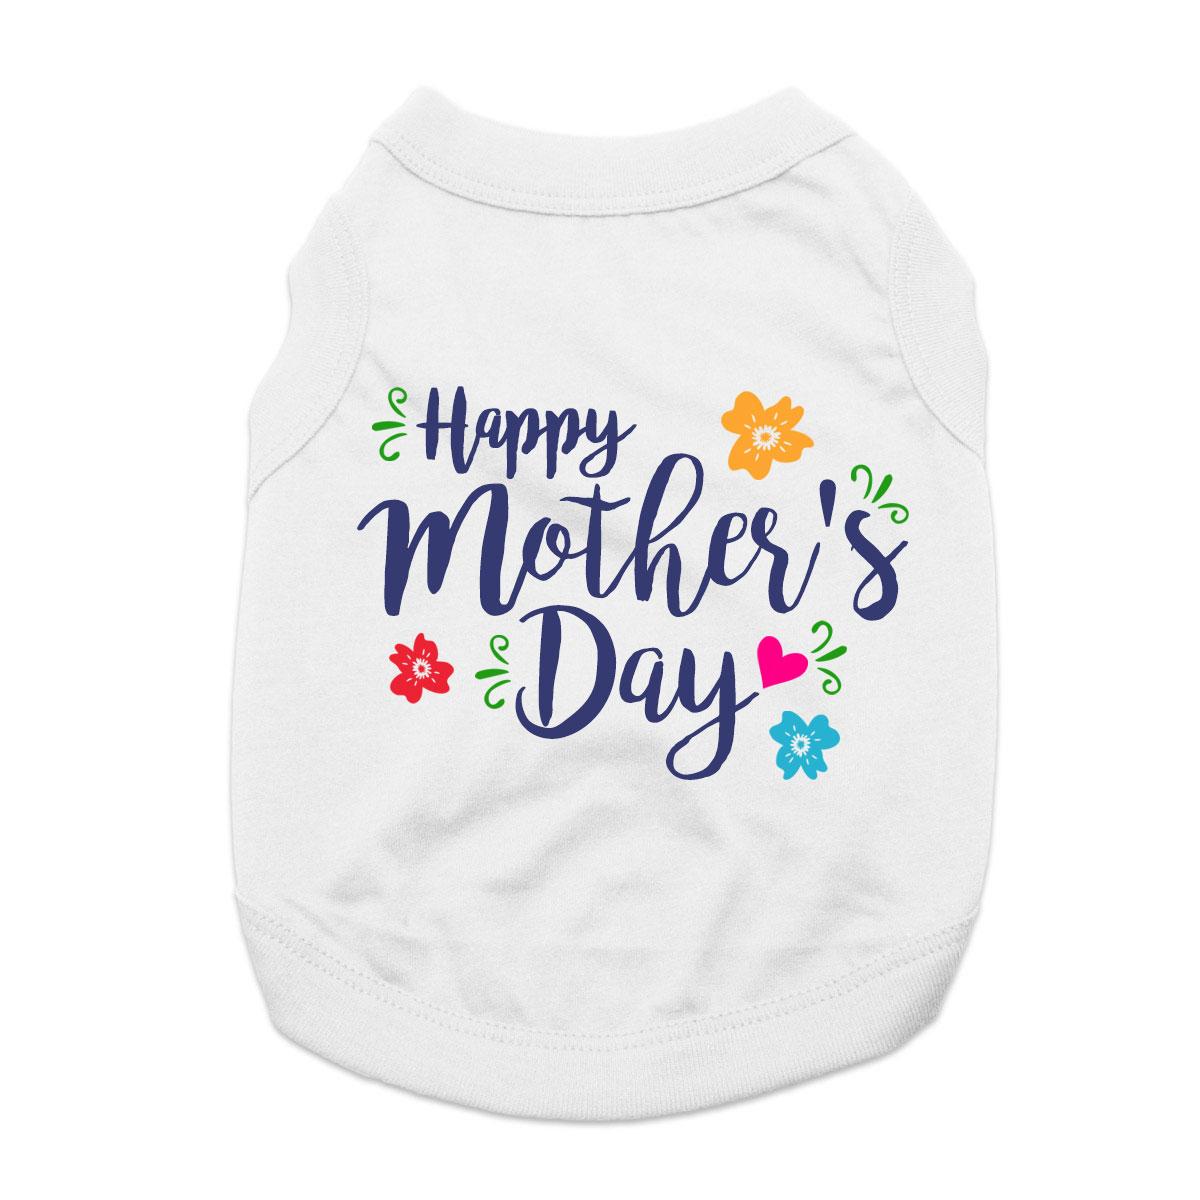 Happy Mother's Day Dog Shirt - White